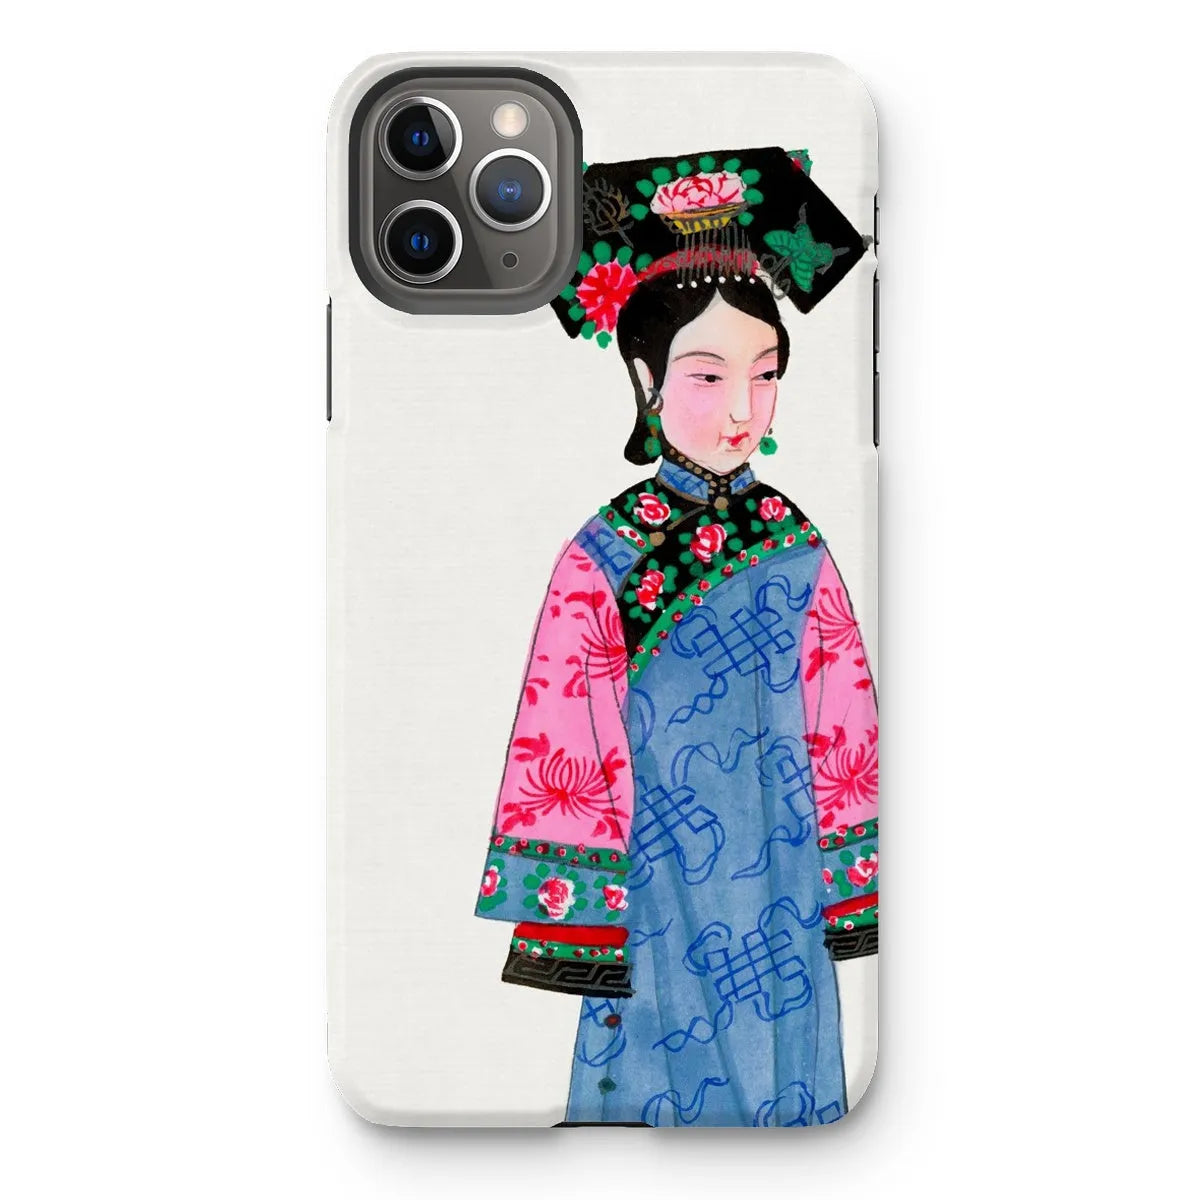 Noblewoman Too - Manchu Aesthetic Art Phone Case - Iphone 11 Pro Max / Matte - Mobile Phone Cases - Aesthetic Art